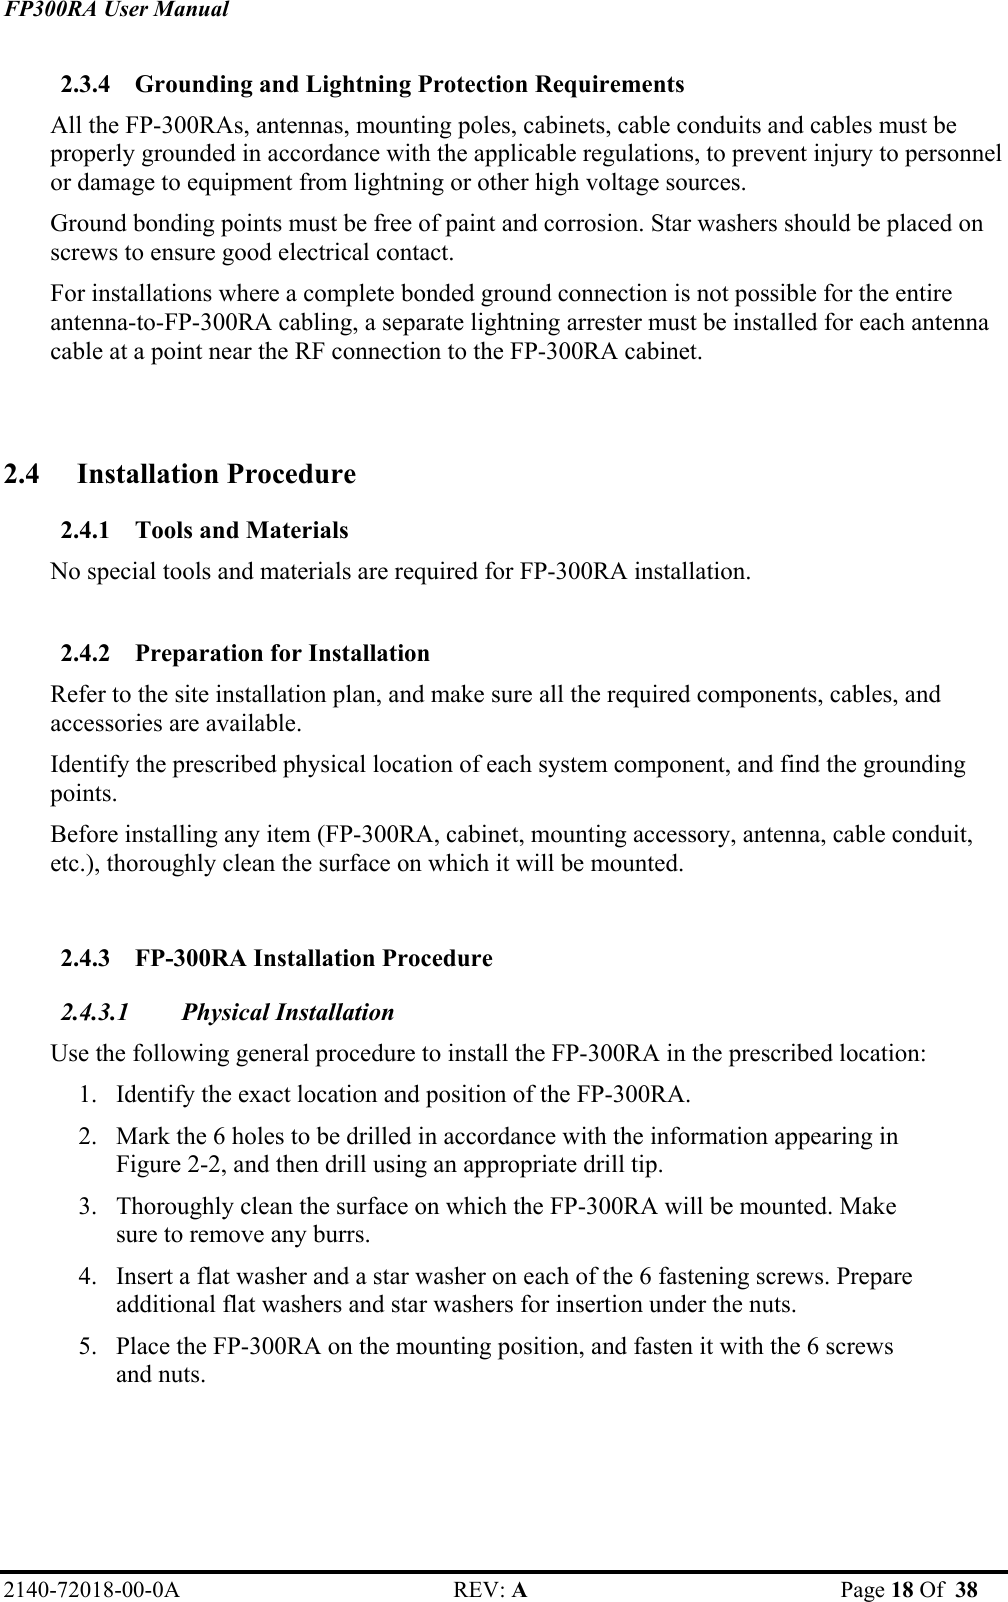 FP300RA User Manual 2140-72018-00-0A REV: A  Page 18 Of  38  2.3.4 Grounding and Lightning Protection Requirements All the FP-300RAs, antennas, mounting poles, cabinets, cable conduits and cables must be properly grounded in accordance with the applicable regulations, to prevent injury to personnel or damage to equipment from lightning or other high voltage sources.  Ground bonding points must be free of paint and corrosion. Star washers should be placed on screws to ensure good electrical contact. For installations where a complete bonded ground connection is not possible for the entire antenna-to-FP-300RA cabling, a separate lightning arrester must be installed for each antenna cable at a point near the RF connection to the FP-300RA cabinet.  2.4 Installation Procedure  2.4.1 Tools and Materials No special tools and materials are required for FP-300RA installation.  2.4.2 Preparation for Installation Refer to the site installation plan, and make sure all the required components, cables, and accessories are available. Identify the prescribed physical location of each system component, and find the grounding points. Before installing any item (FP-300RA, cabinet, mounting accessory, antenna, cable conduit, etc.), thoroughly clean the surface on which it will be mounted.  2.4.3 FP-300RA Installation Procedure 2.4.3.1 Physical Installation  Use the following general procedure to install the FP-300RA in the prescribed location: 1. Identify the exact location and position of the FP-300RA. 2. Mark the 6 holes to be drilled in accordance with the information appearing in Figure 2-2, and then drill using an appropriate drill tip.  3. Thoroughly clean the surface on which the FP-300RA will be mounted. Make sure to remove any burrs.  4. Insert a flat washer and a star washer on each of the 6 fastening screws. Prepare additional flat washers and star washers for insertion under the nuts. 5. Place the FP-300RA on the mounting position, and fasten it with the 6 screws and nuts. 